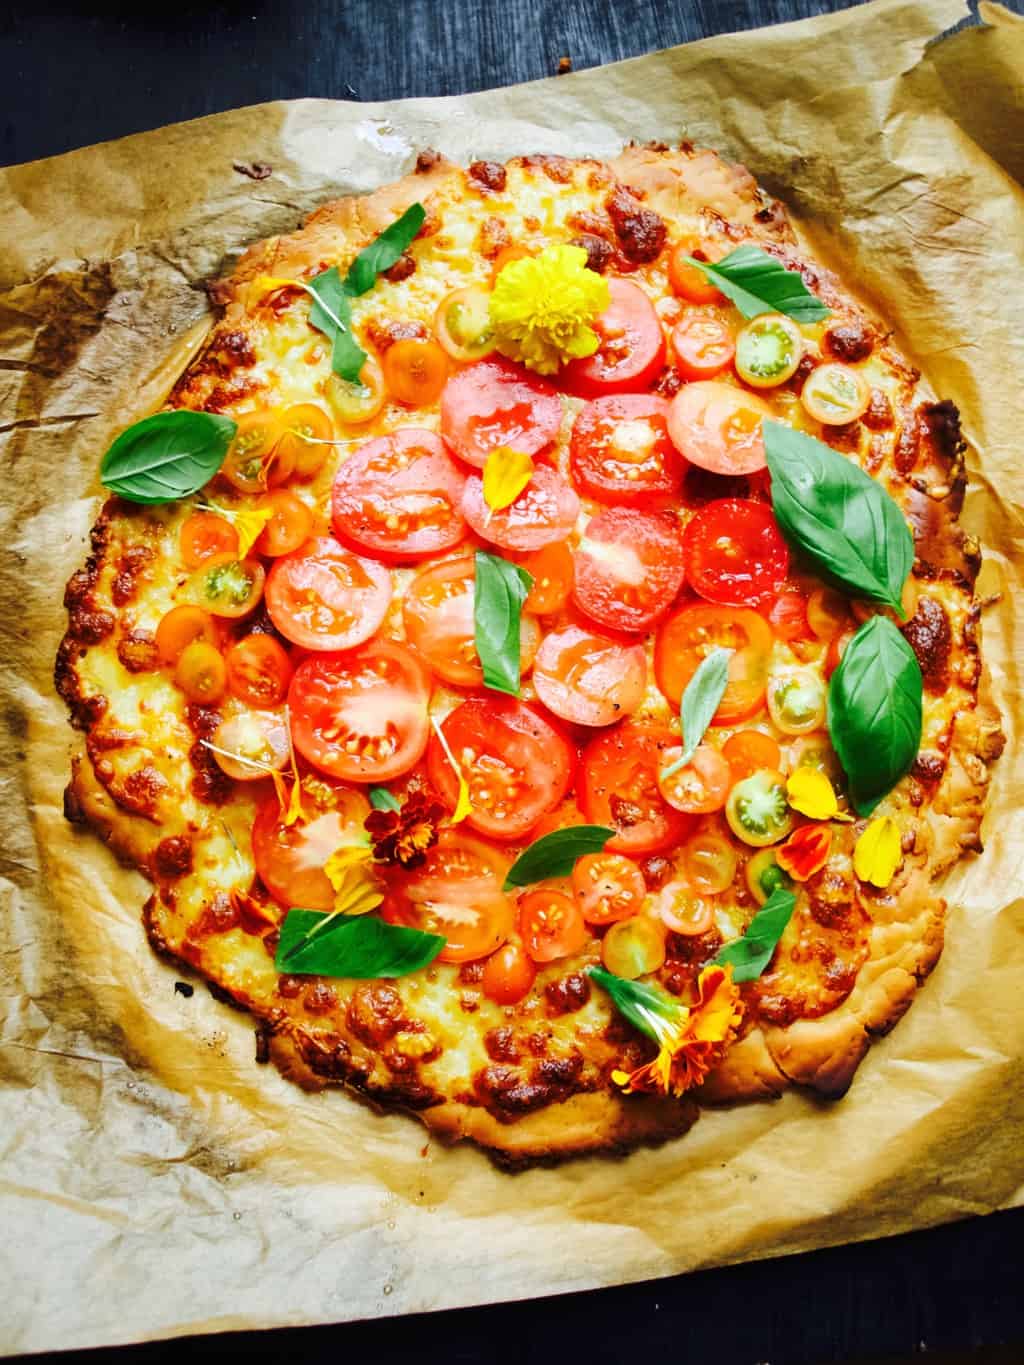 Gluten free pizza topped with fresh ingredients